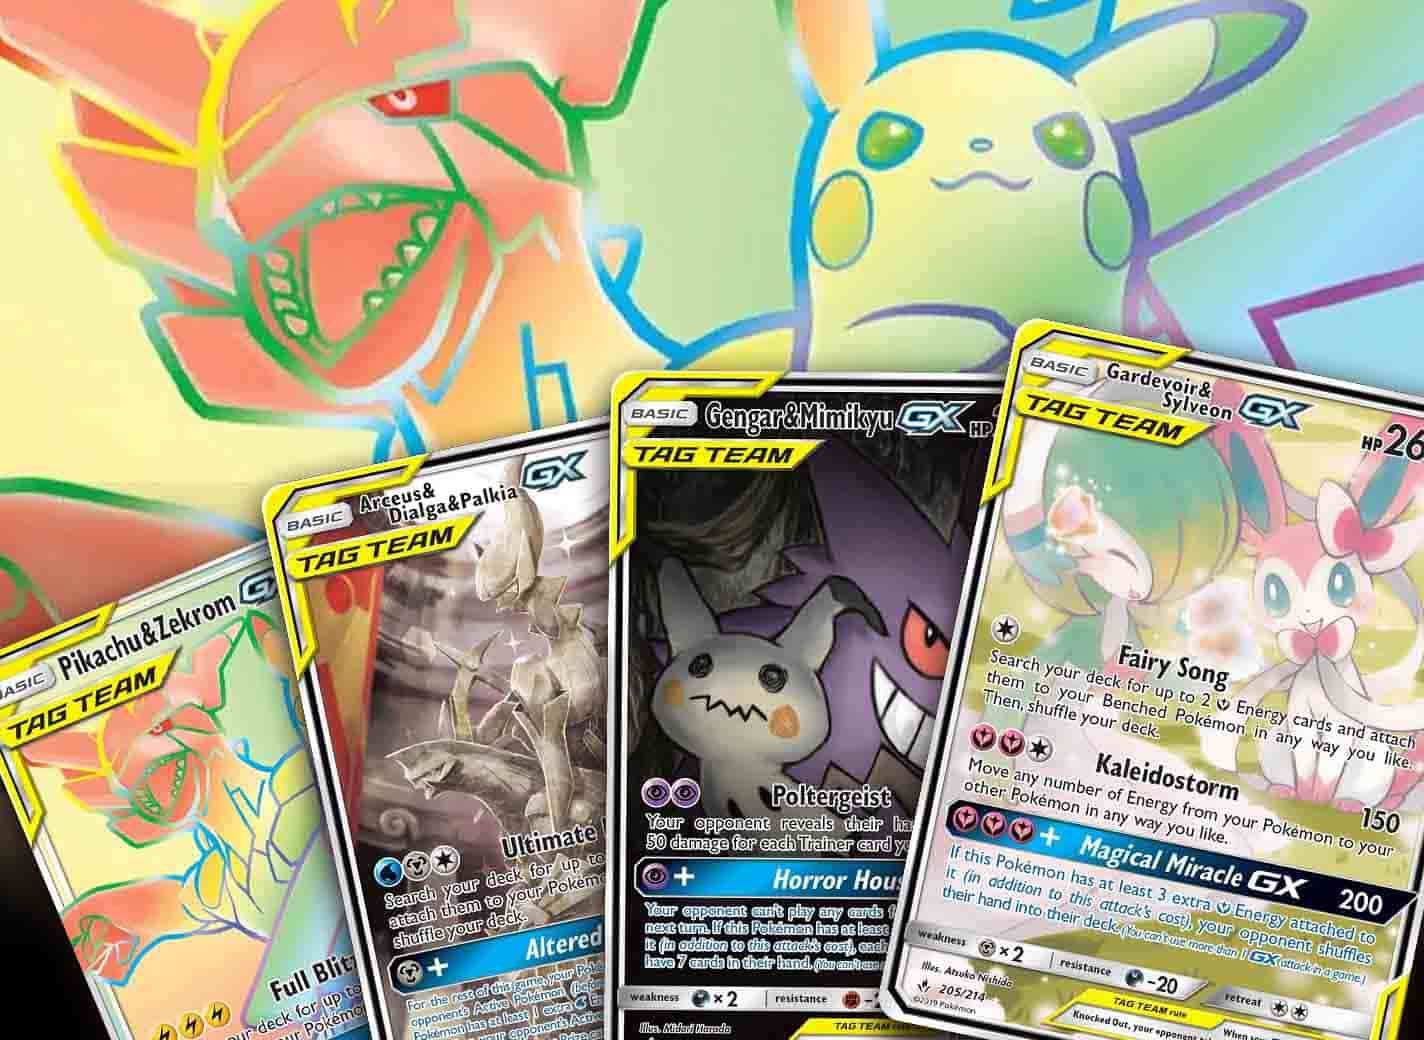 All versions from all sets for Pikachu & Zekrom GX